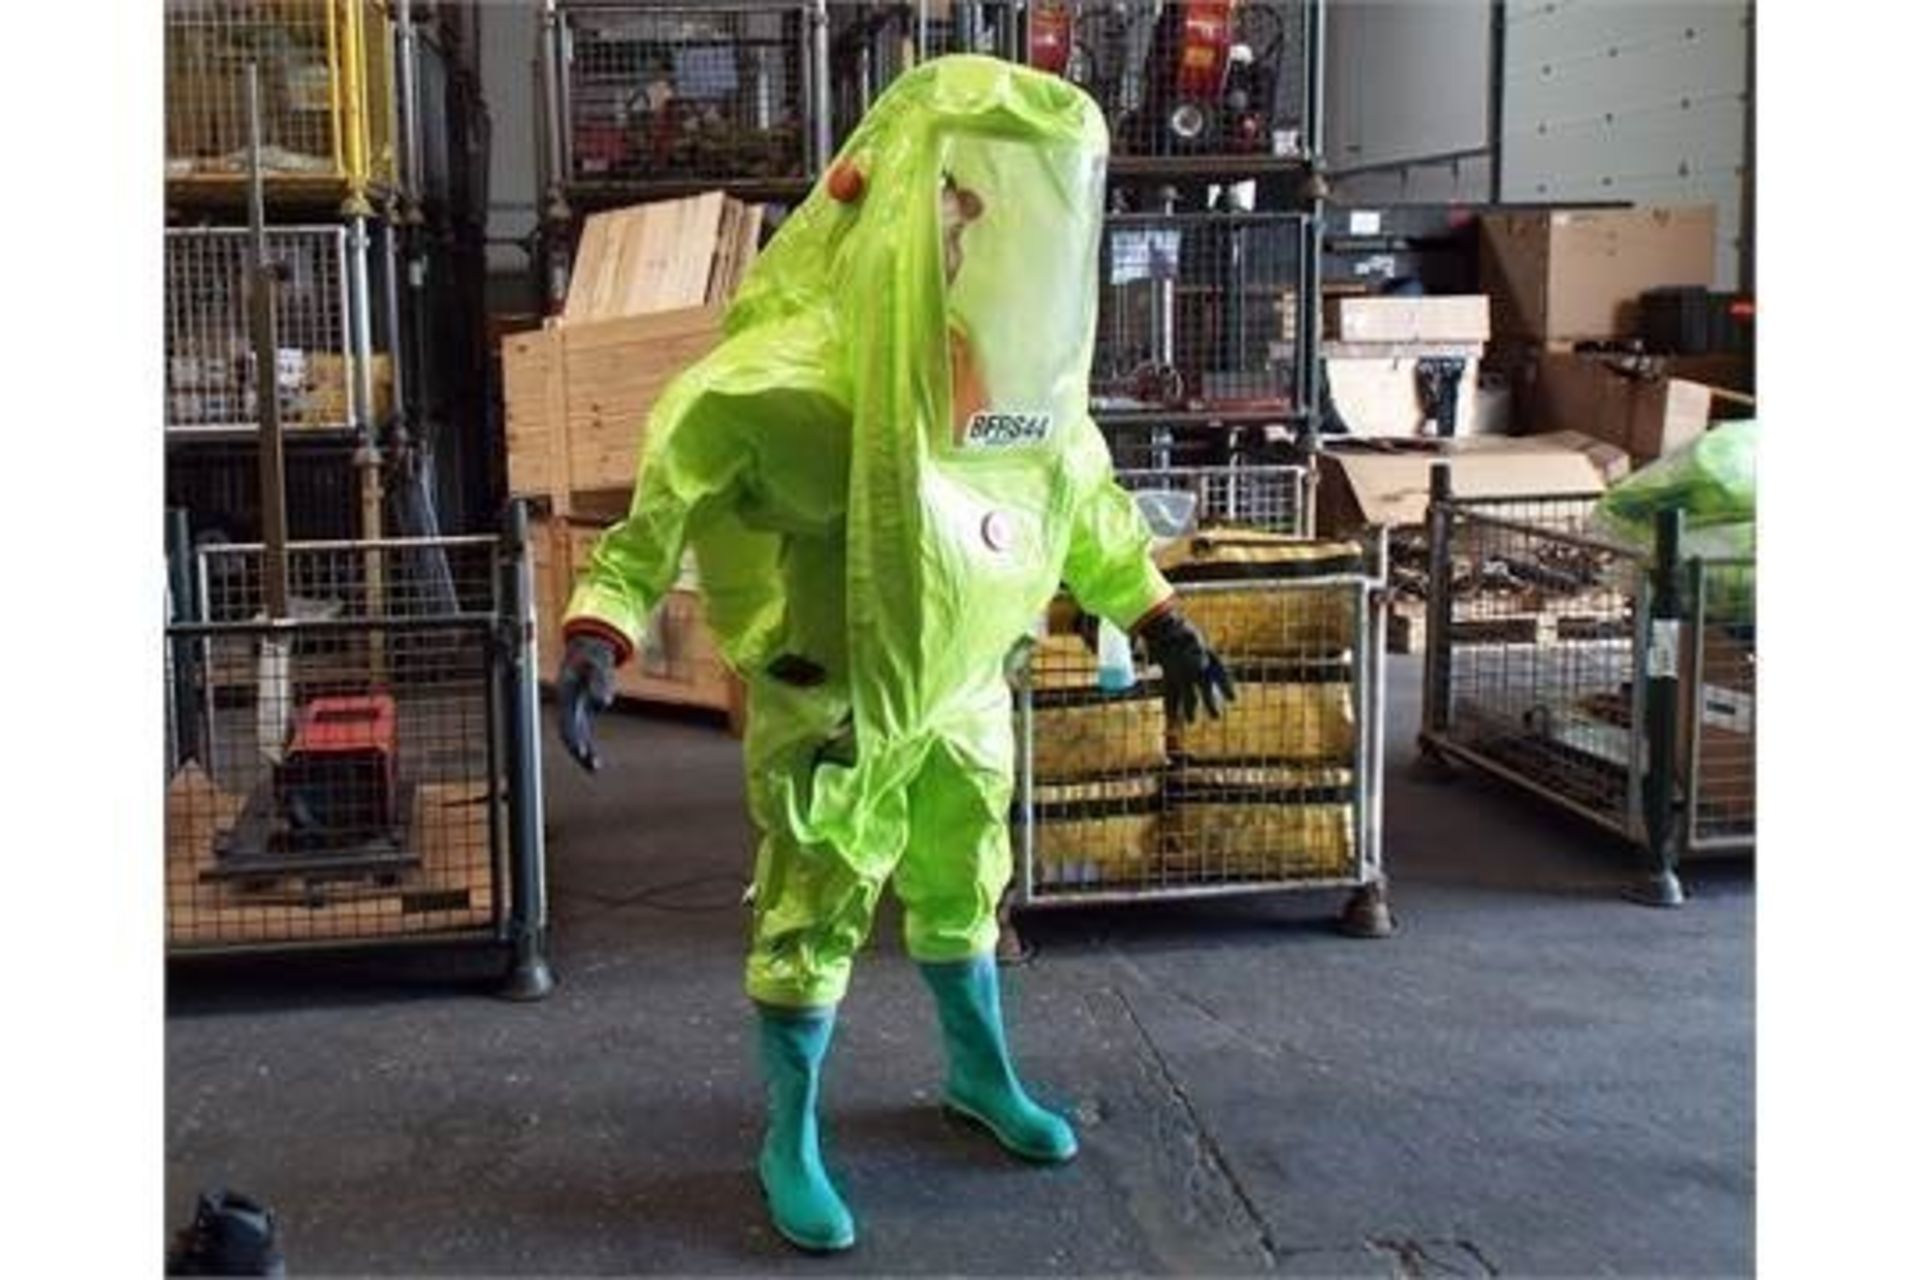 13 x Respirex Tychem TK Gas-Tight Hazmat Suit Type 1A with Attached Boots and Gloves